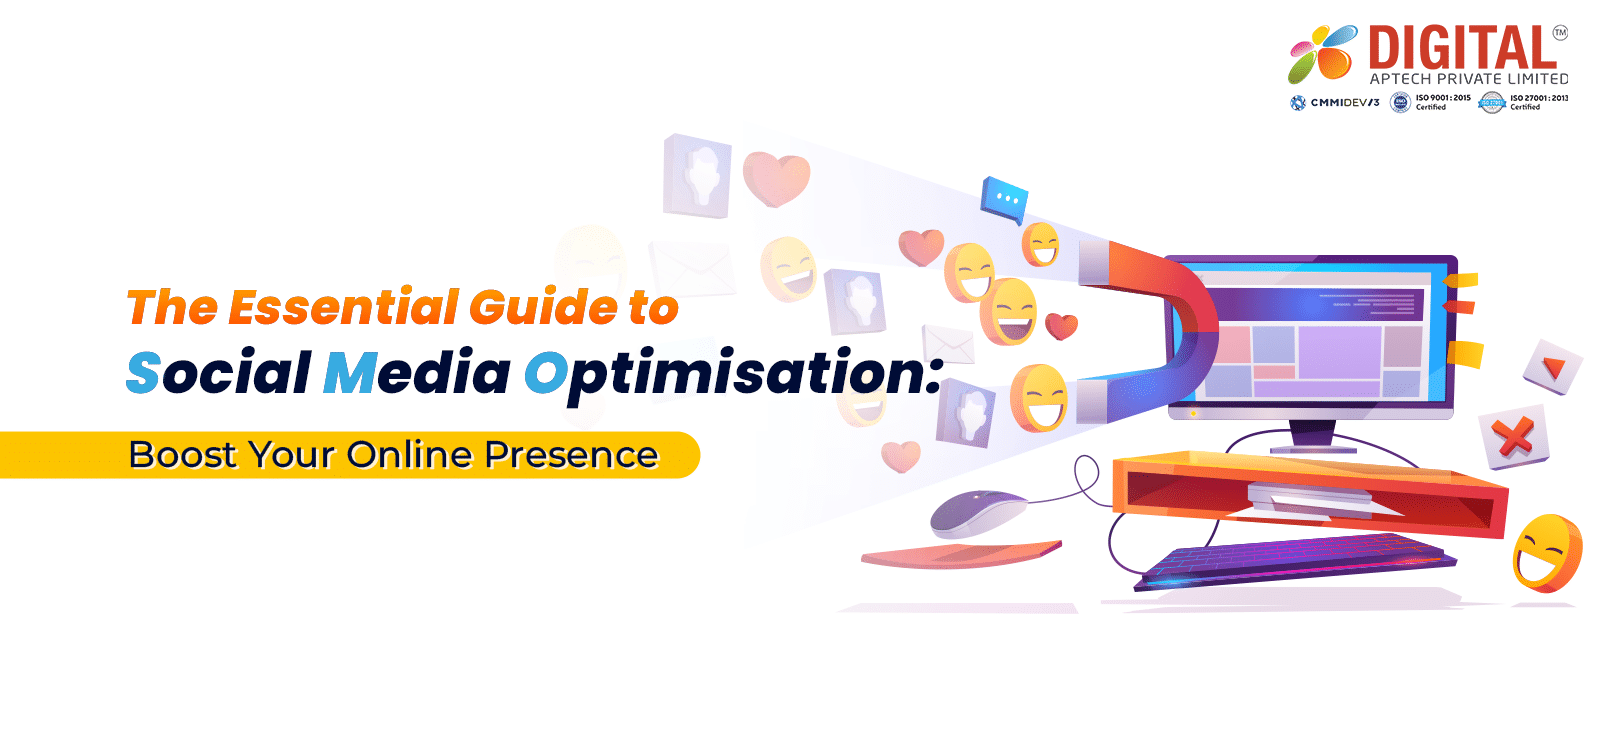 The Essential Guide to Social Media Optimisation: Boost Your Online Presence